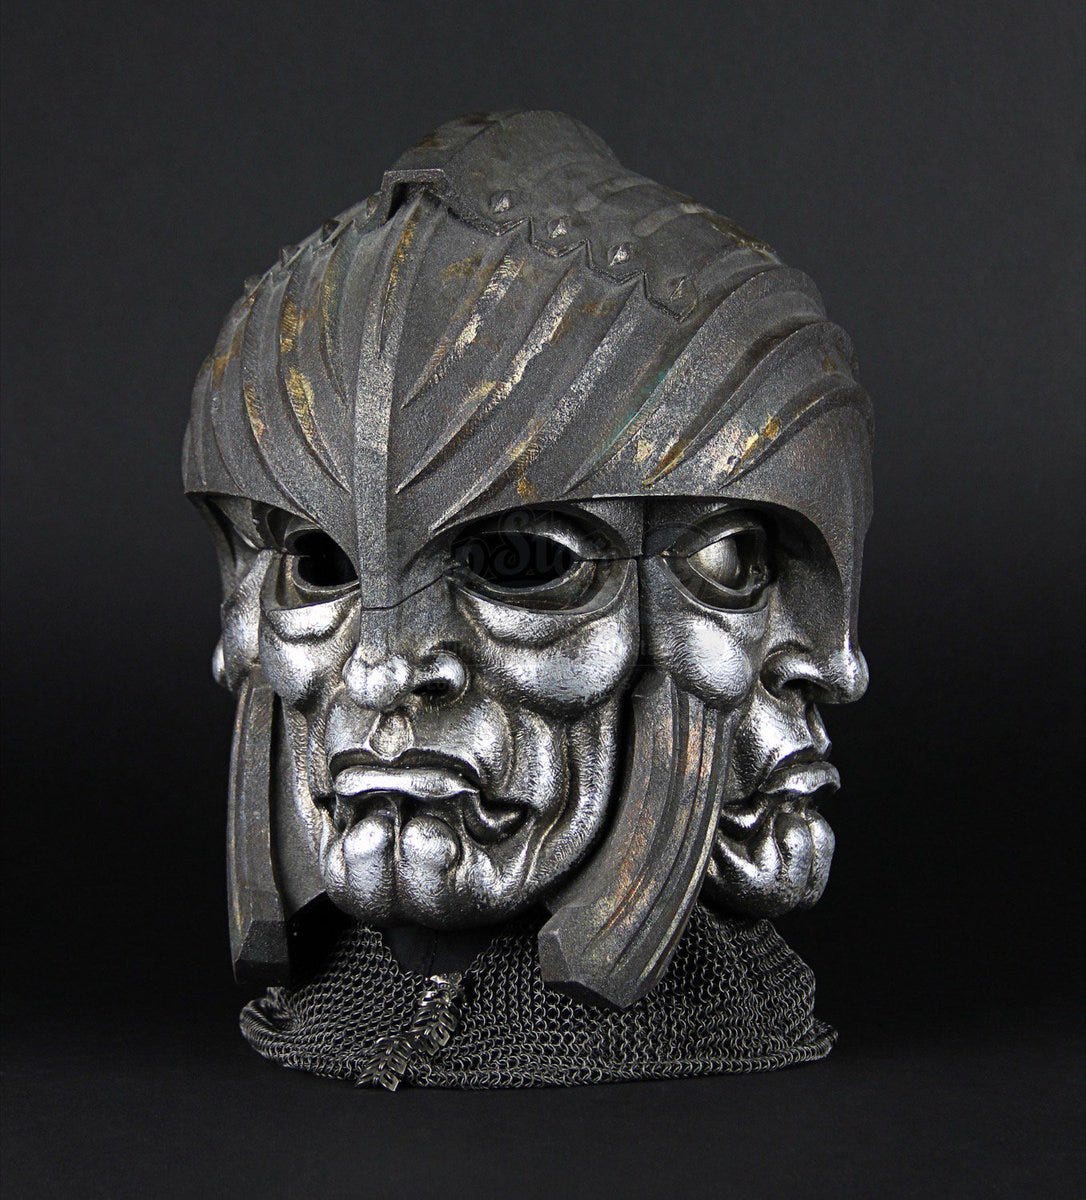 Image Description: A helmet made of glossy silver metal. The front is a face with only eye holes. Each other side of the helmet as the exact same face except no eye holes. The art style is reminiscent of Roman metallurgy and iconography.